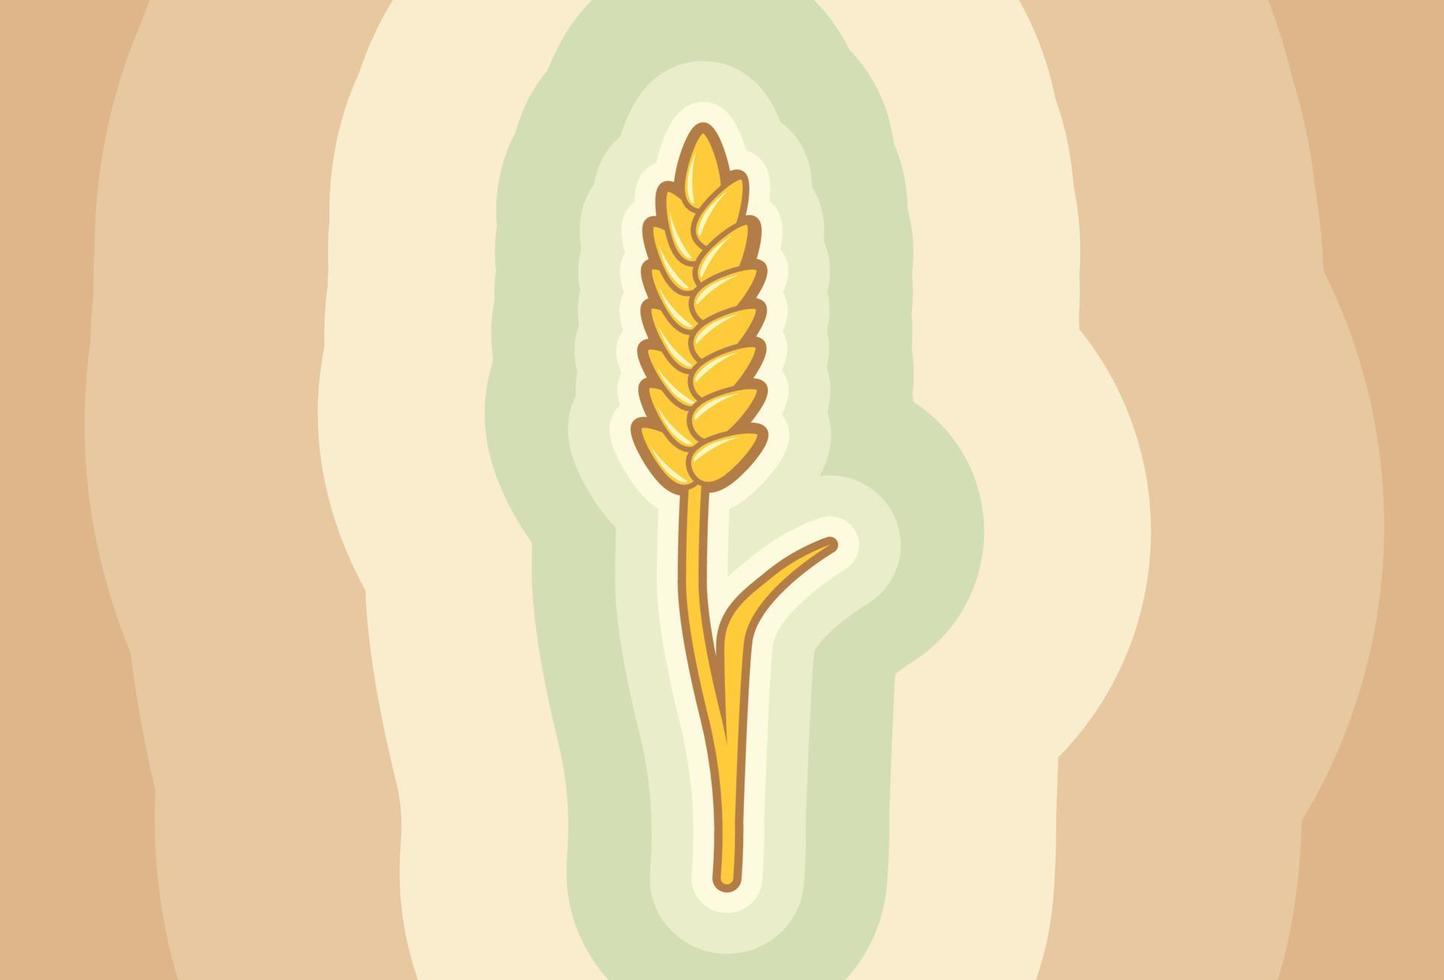 Vector vintage poster of wheat ear. Illustration of wheat ear in retro style.